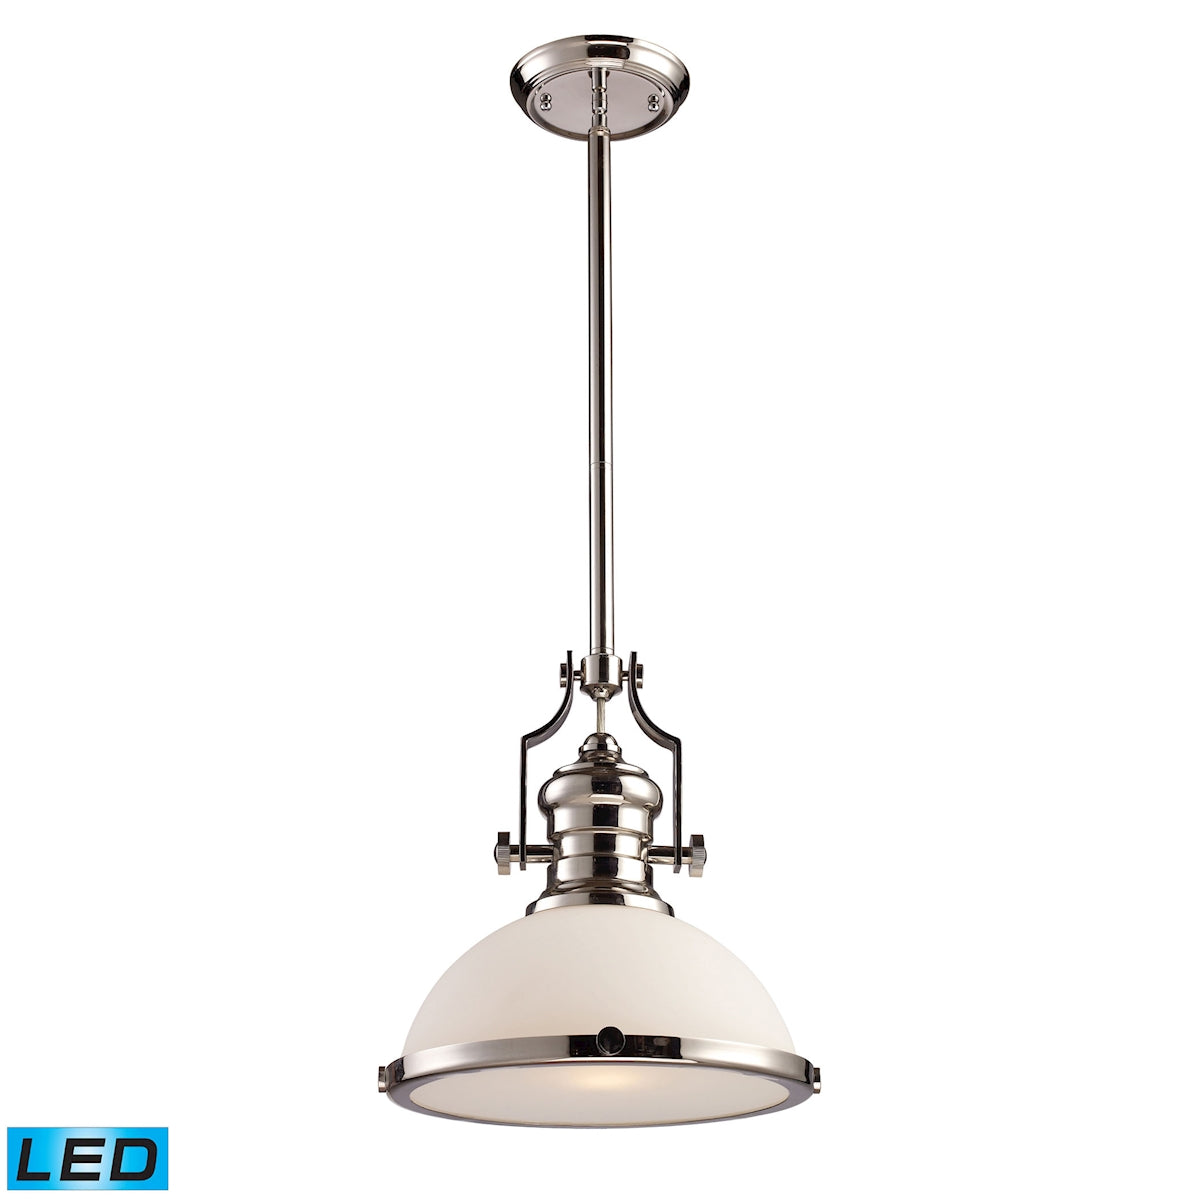 Chadwick 1-Light Pendant in Polished Nickel with White Glass - Includes LED Bulb